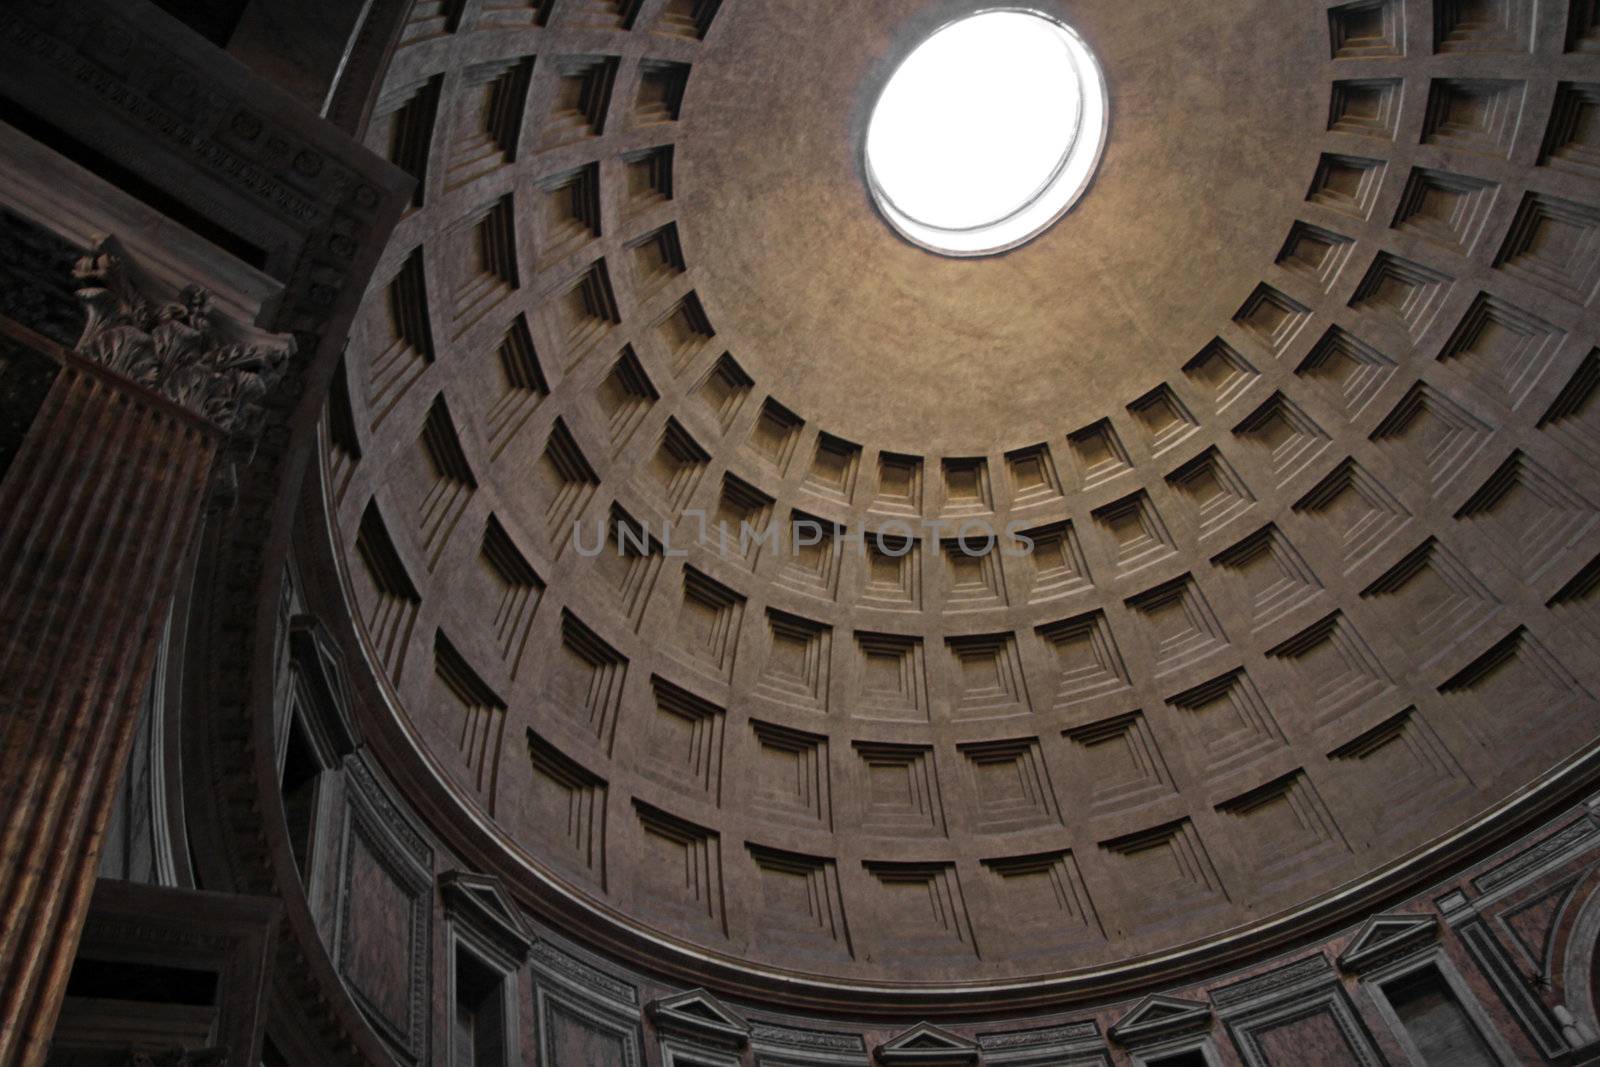 The dome of the Pantheon in Rome, Italy.  The Greek meaning of the word 'Pantheon' is an adjective meaning "to every god".  It was built around 126 AD by emporer Hadrian.
